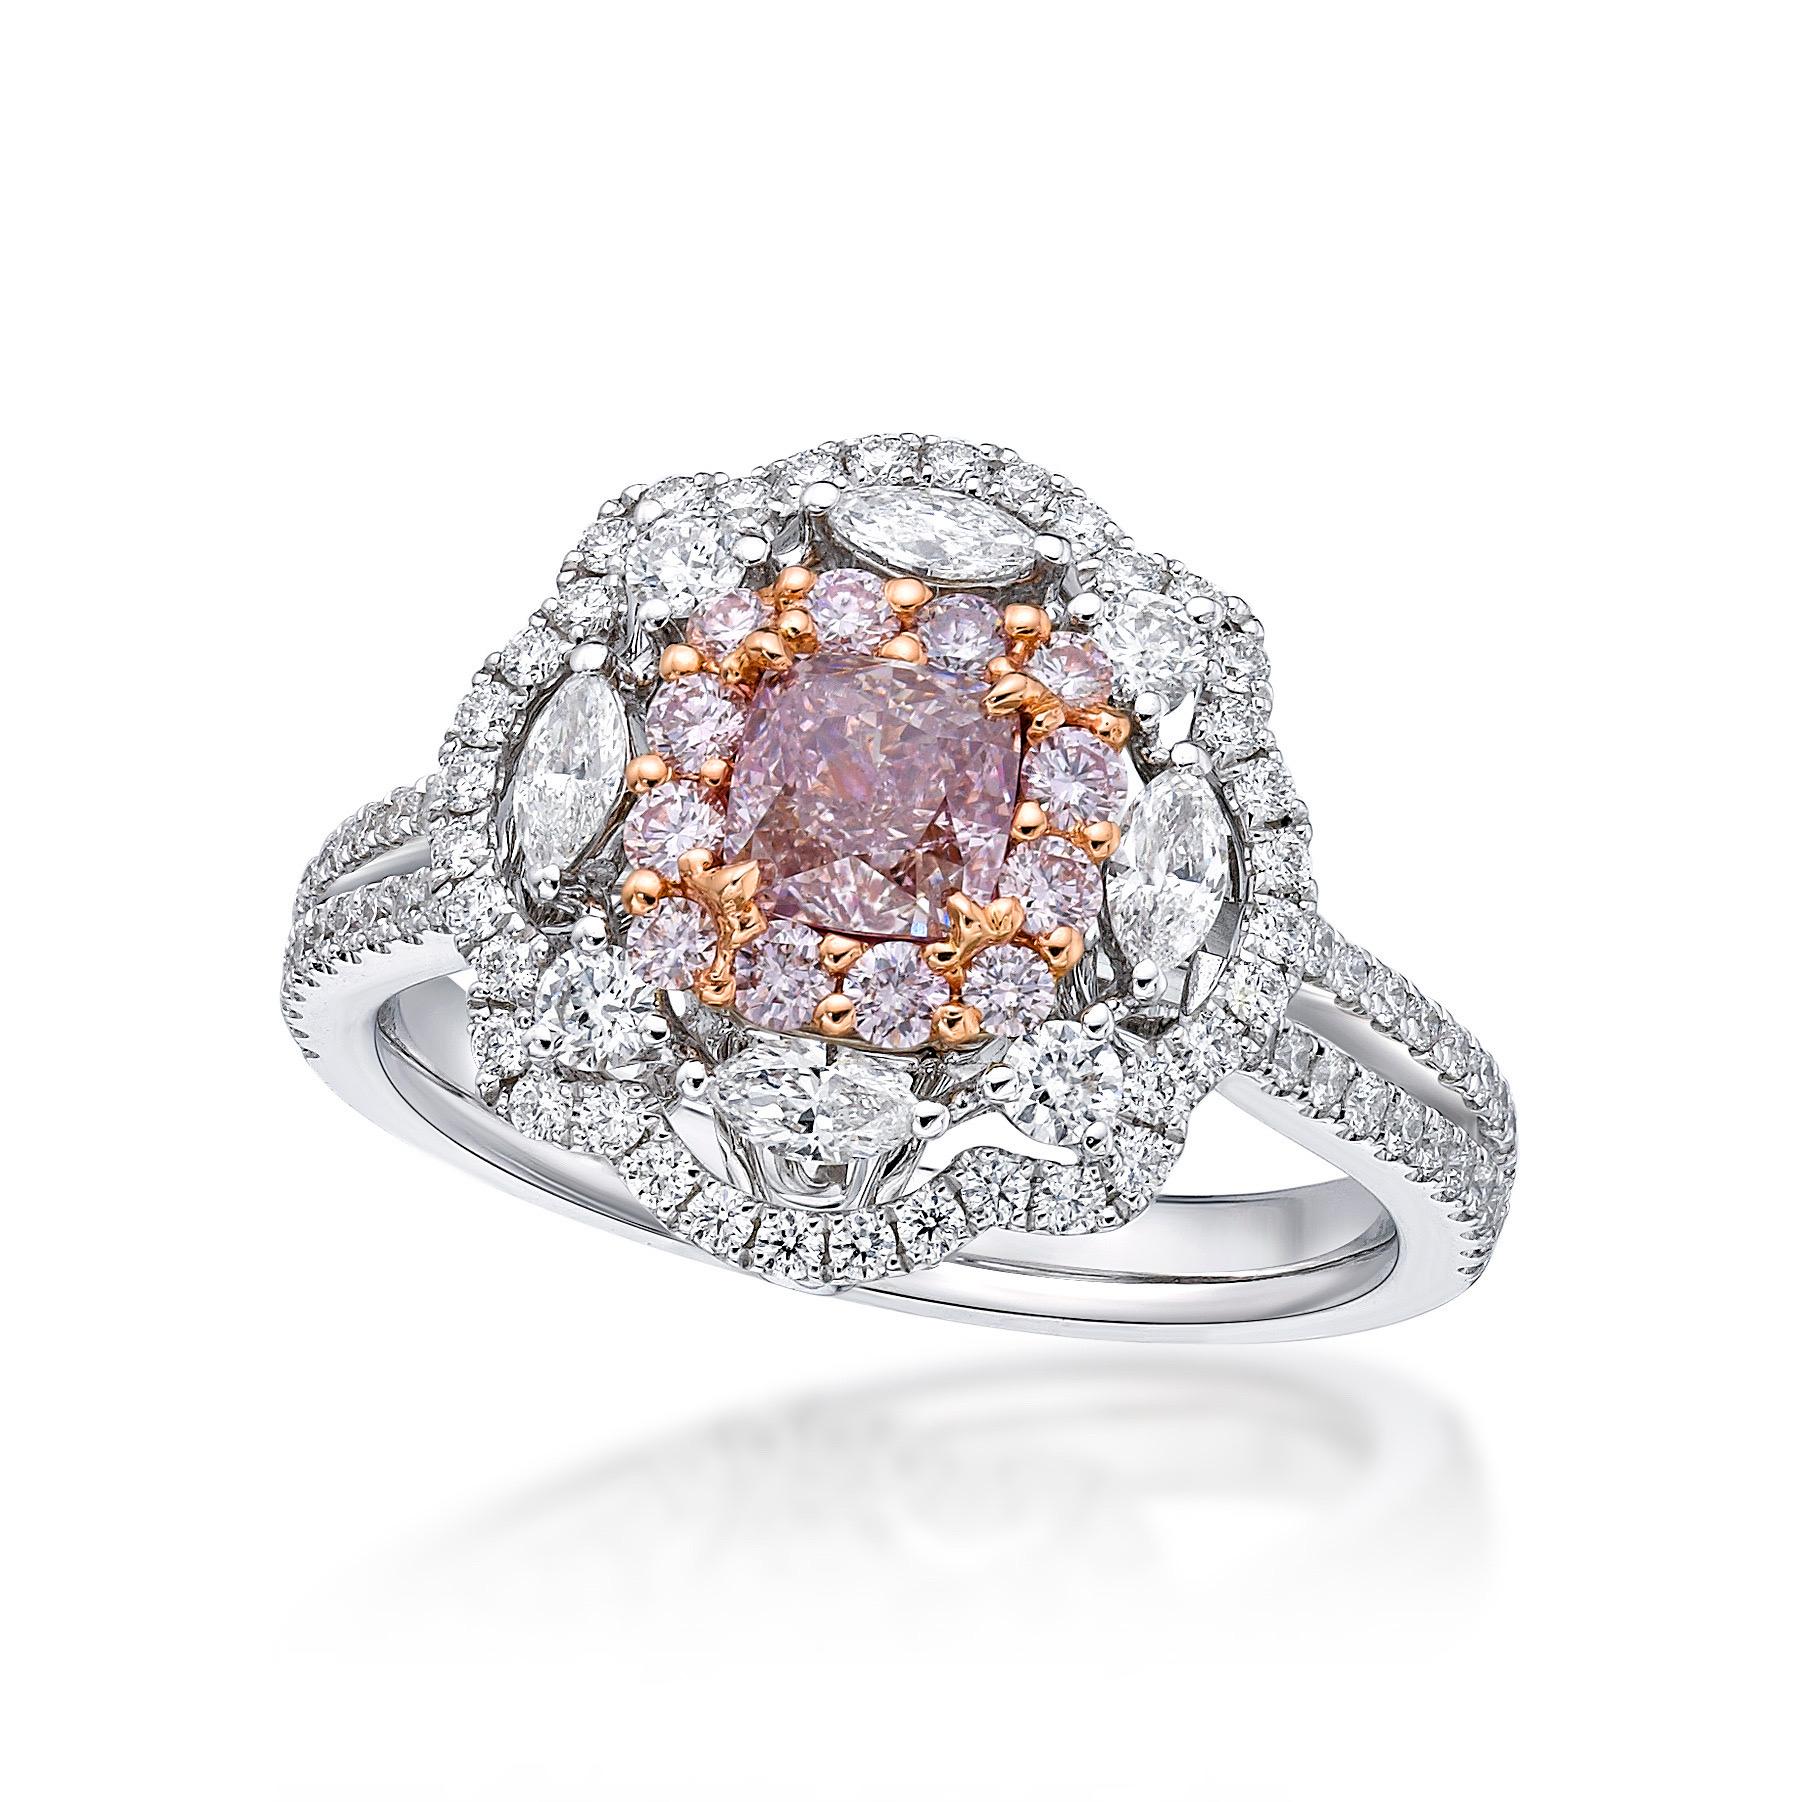 center 0.57ct
4 marquise 0.22ct
84 rounds 0.41ct
16 diamonds .37ct


From The  Vault at Emilio Jewelry Located on New York's iconic Fifth Avenue,
Showcasing a very special and rare Gia certified natural fancy brown pink diamond si2 set in the center